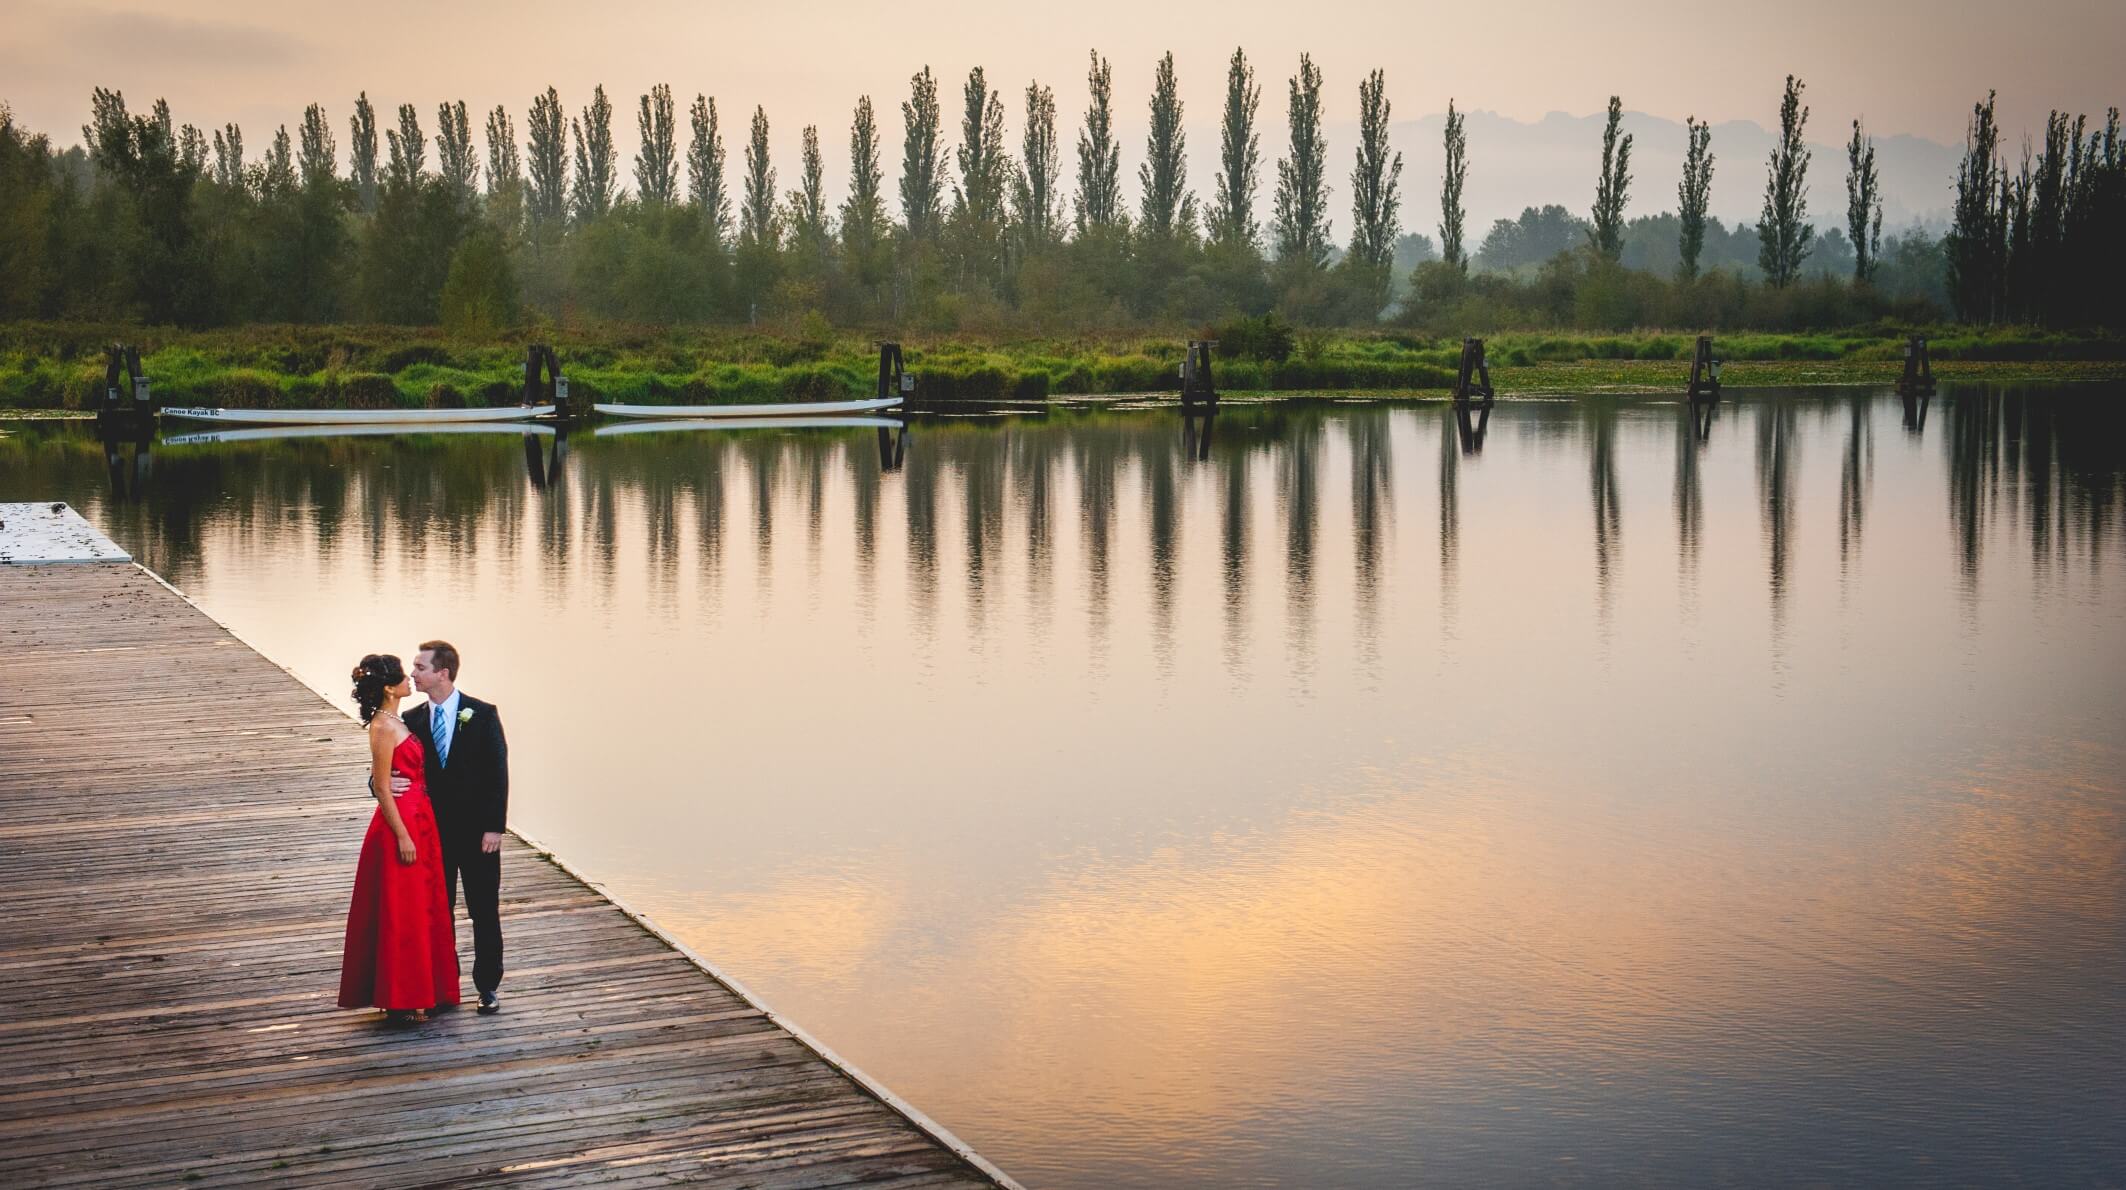 Couple standing on the dock by a lake at dusk.